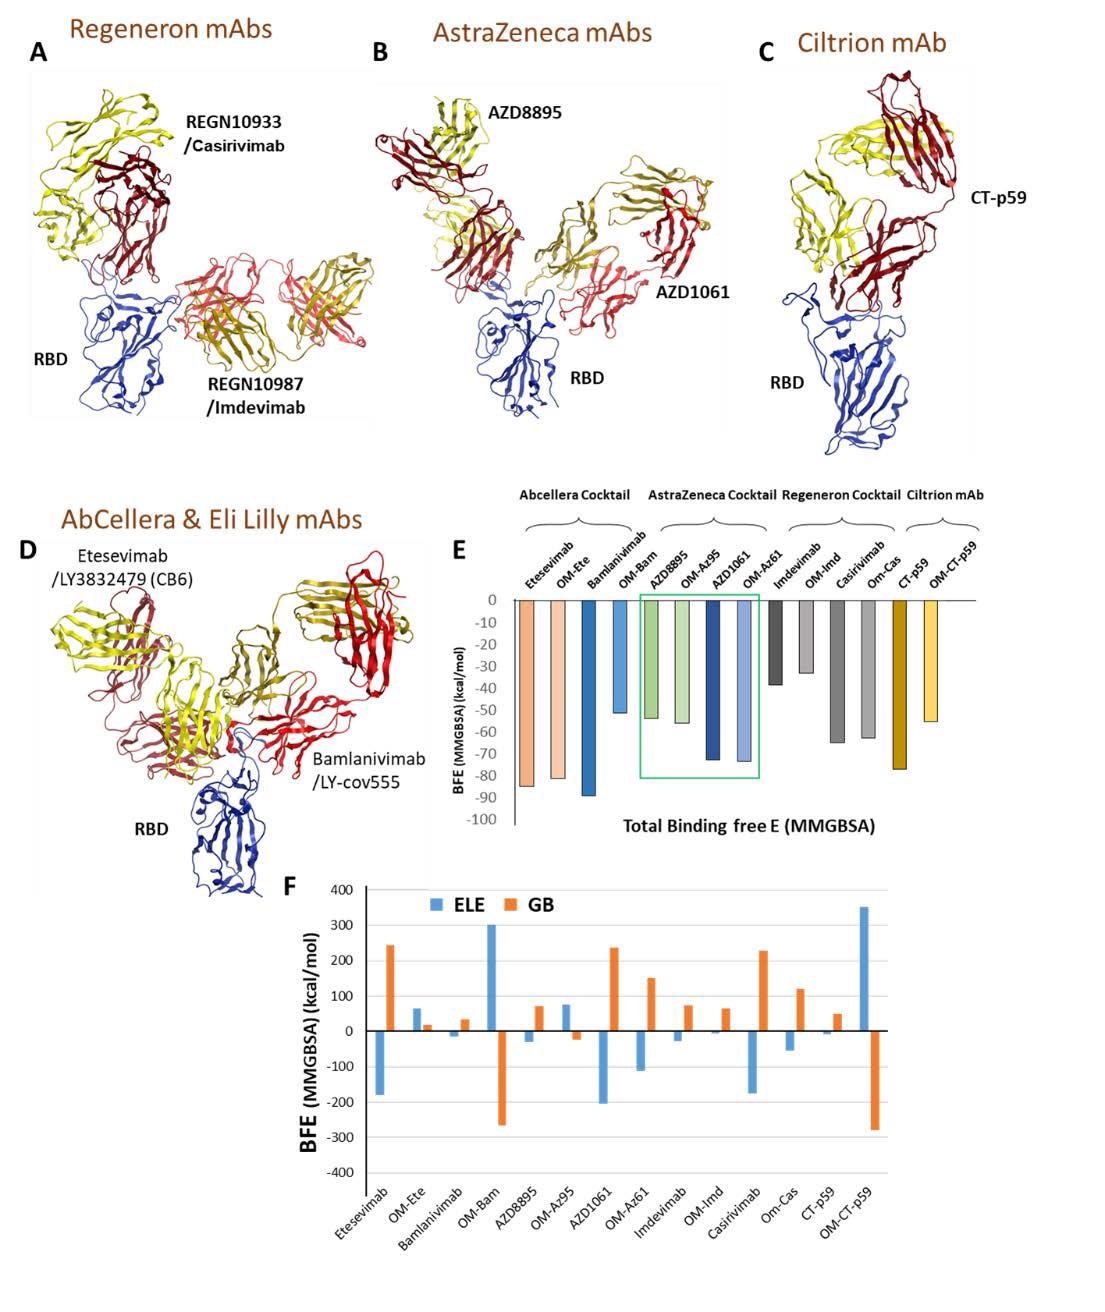 Mutations in the Omicron RBD distort the epitopes of therapeutic mAbs. A-D) Crude epitopes of seven selected mAbs are shown on the RBD. Antibodies used as cocktails are labeled with their sponsors. All variable light chains are colored yellow or orange and variable heavy chains are colored red. E) Changes in the binding affinity of the RBDOmic-mAbs relative to RBDWT-mAbs are shown. The Binding energies were calculated through endpoint MM/GBSA). F) Changes in the electrostatic potentials and polar solvation energies are shown to each RBD-mAb complex.